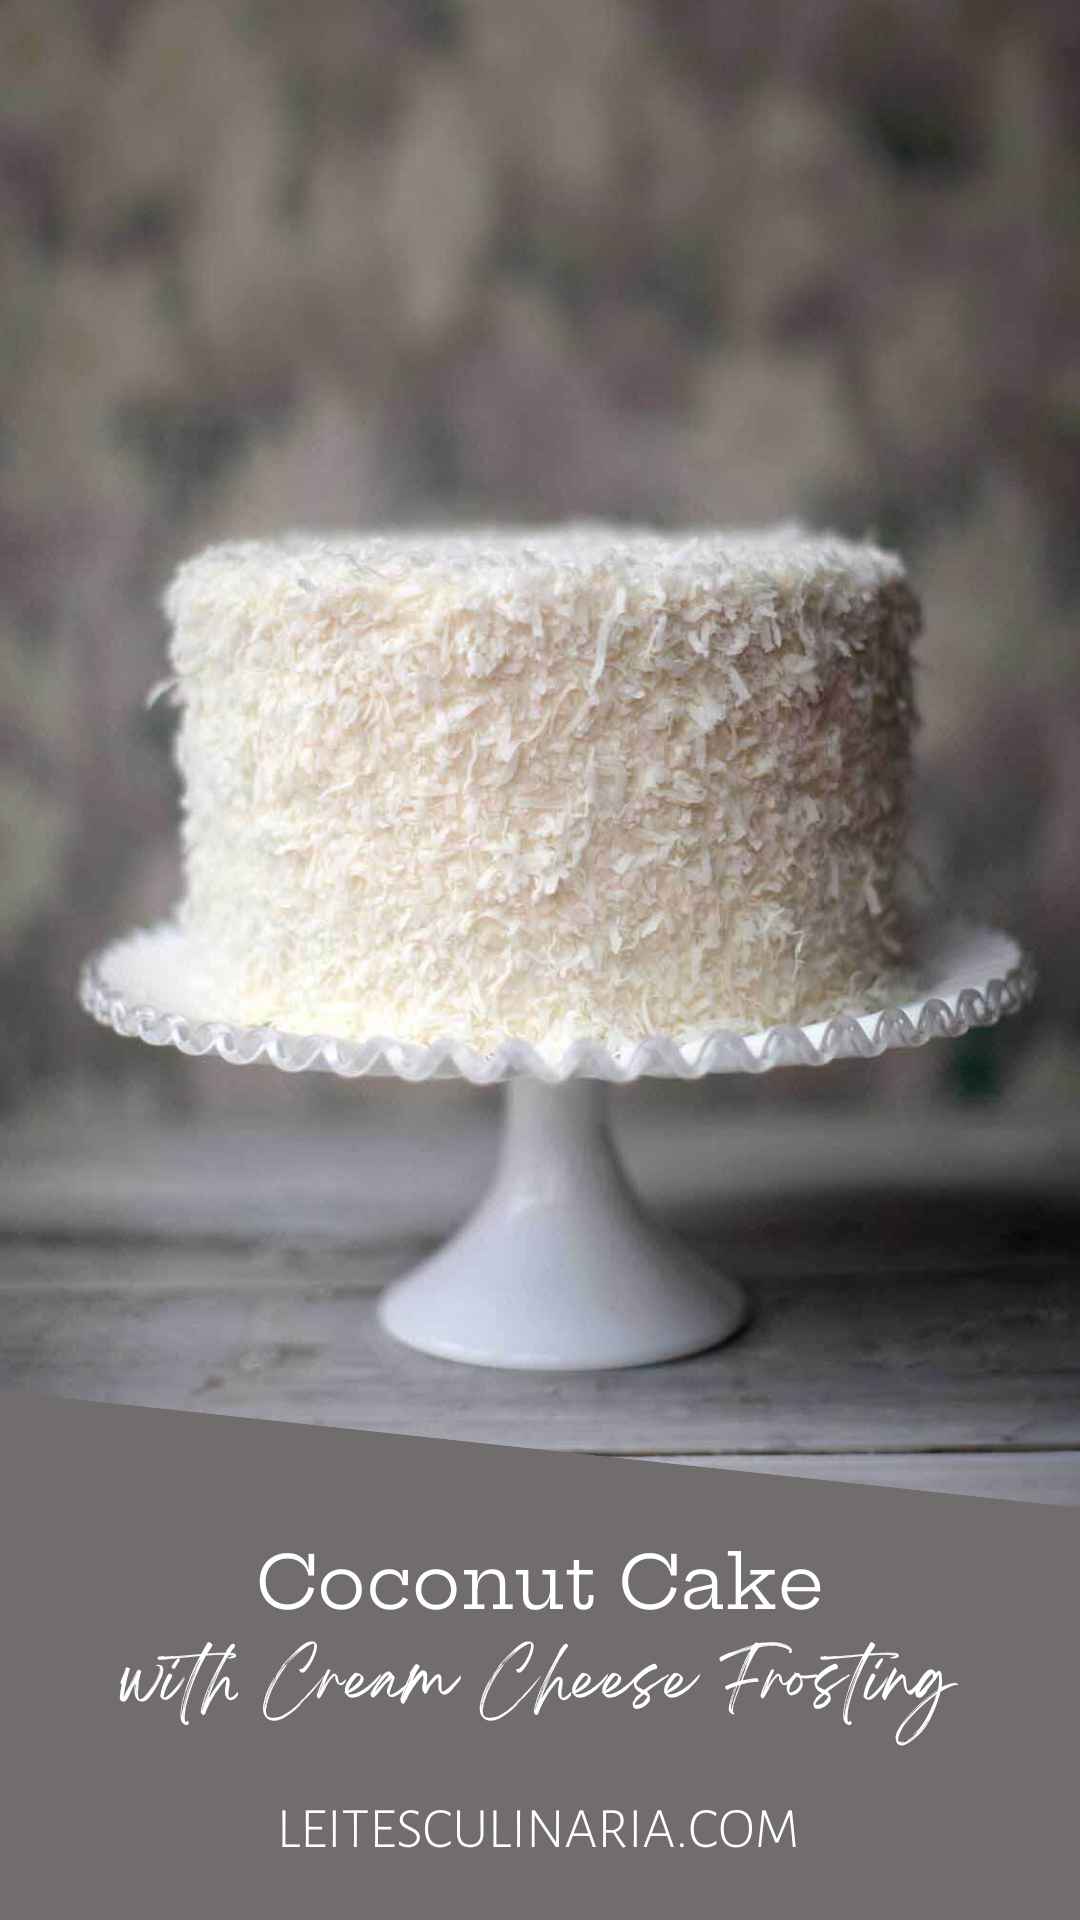 A coconut cake covered in shredded coconut on a white cake stand.